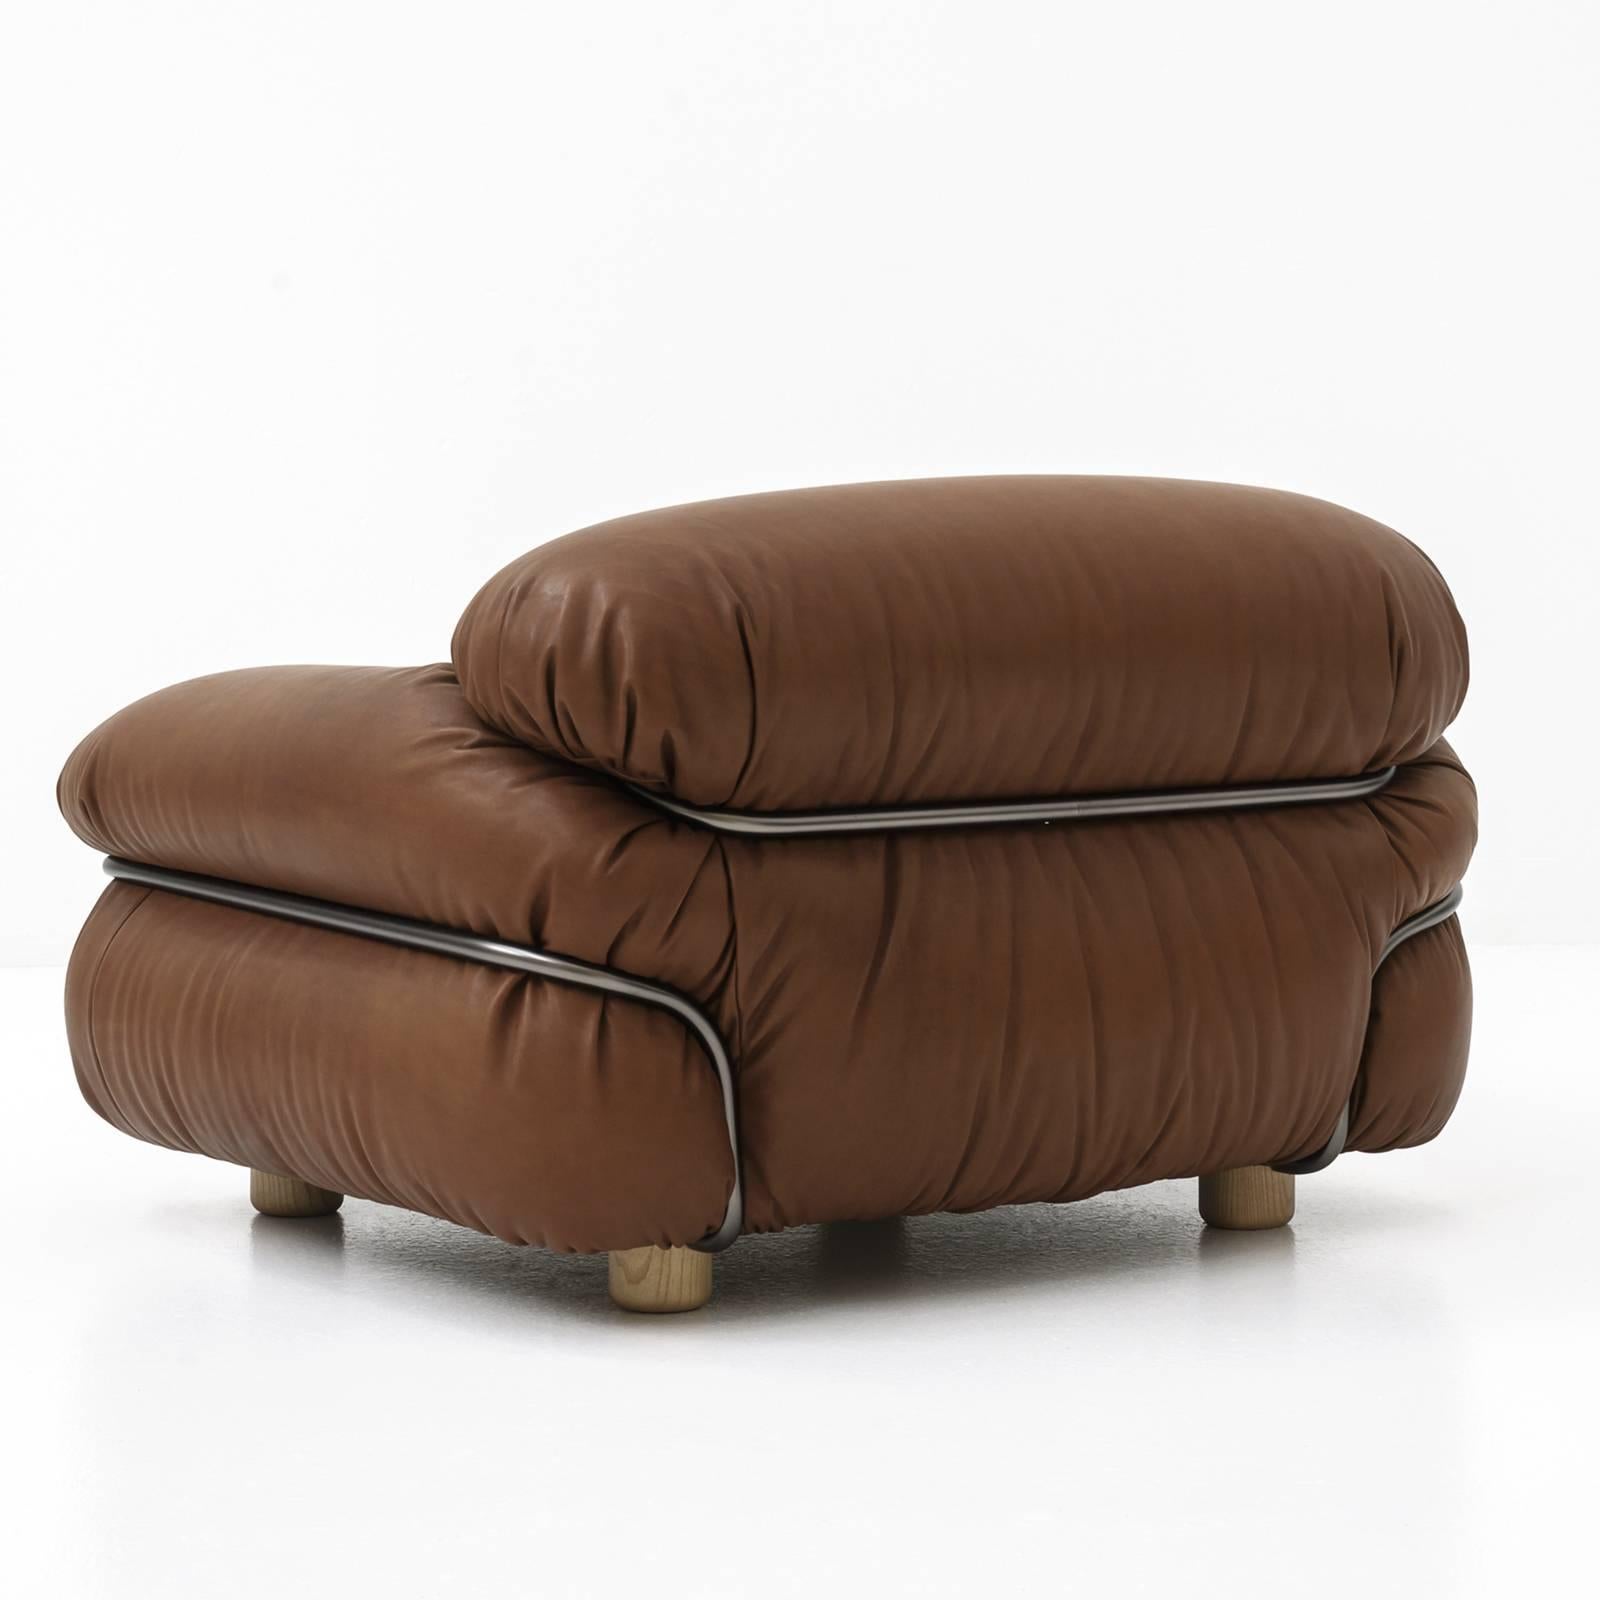 Designed in the 1970s by Milanese architect Gianfranco Frattini, this armchair is an exquisite example of elegance and comfort. Either used at home, to add sophistication to a modern living room, or as standout piece in an office, this object of